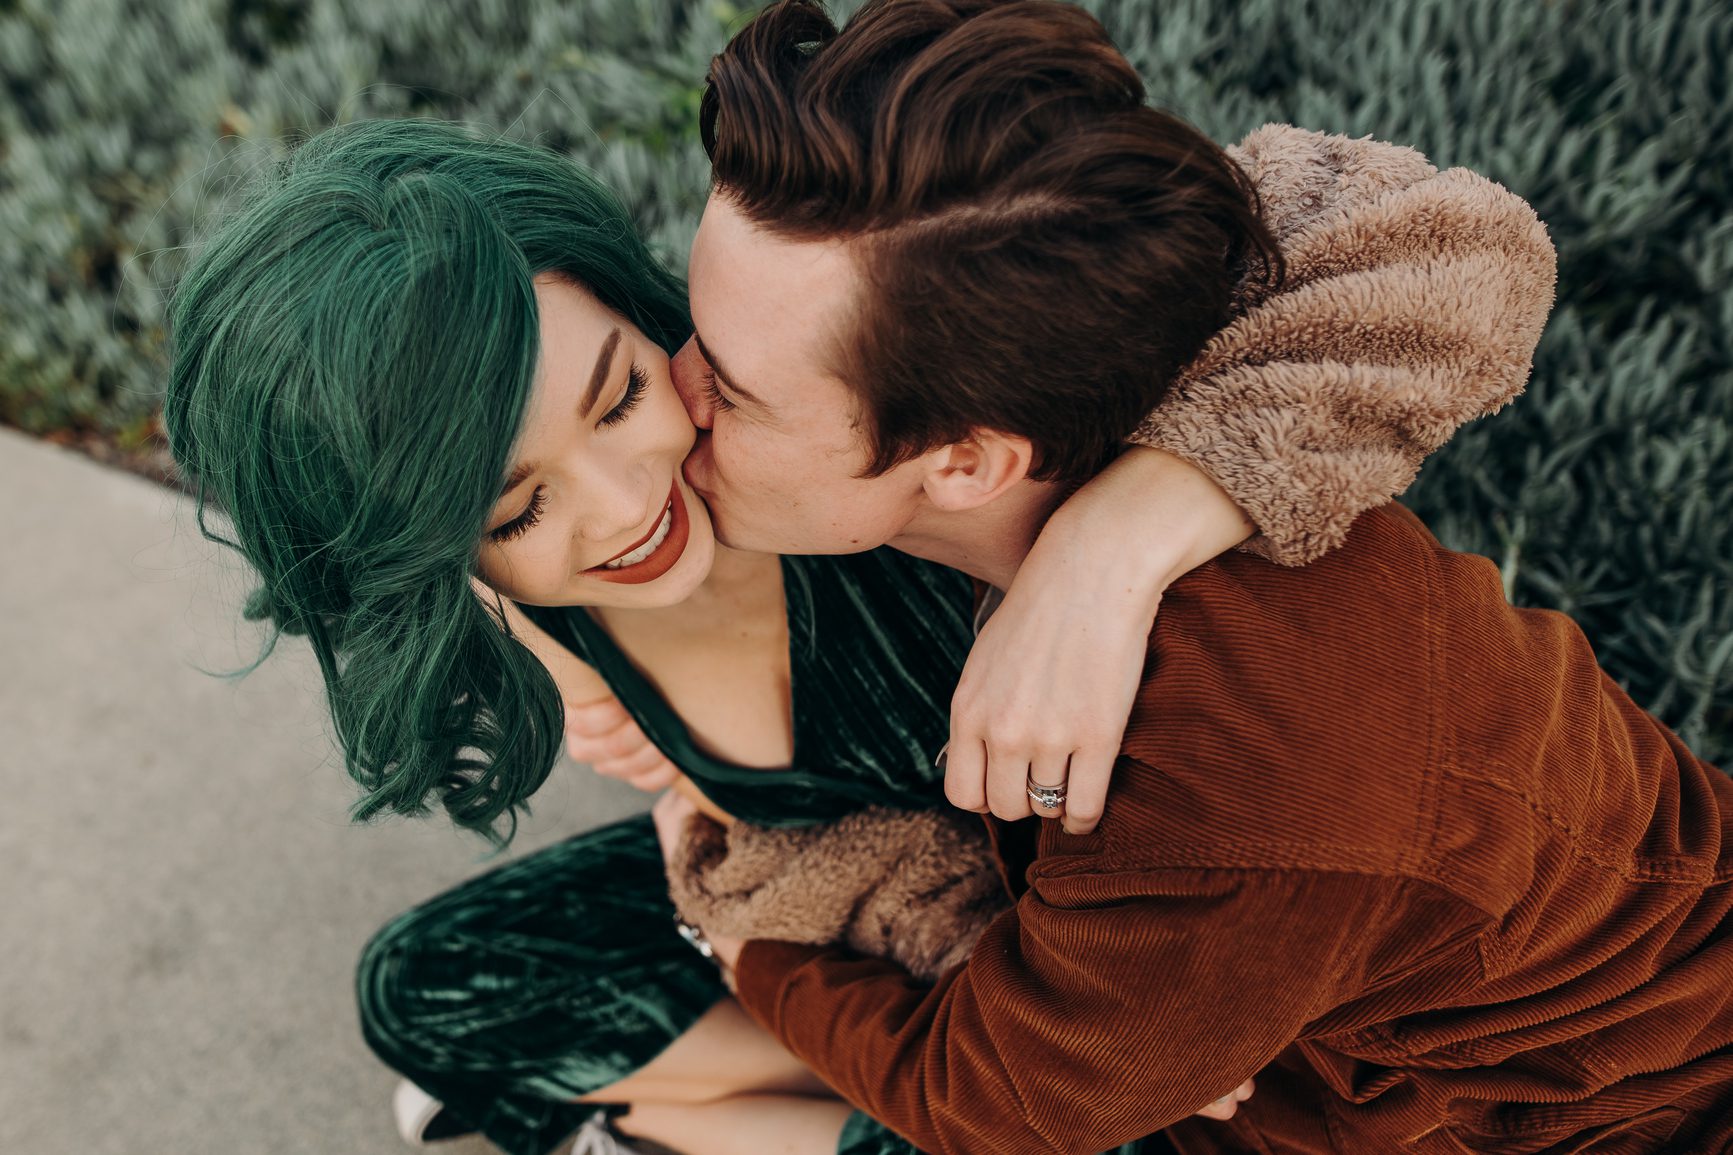 Trendy vintage couple with arms wrapped around each other with boyfriend kissing girlfriend's cheek